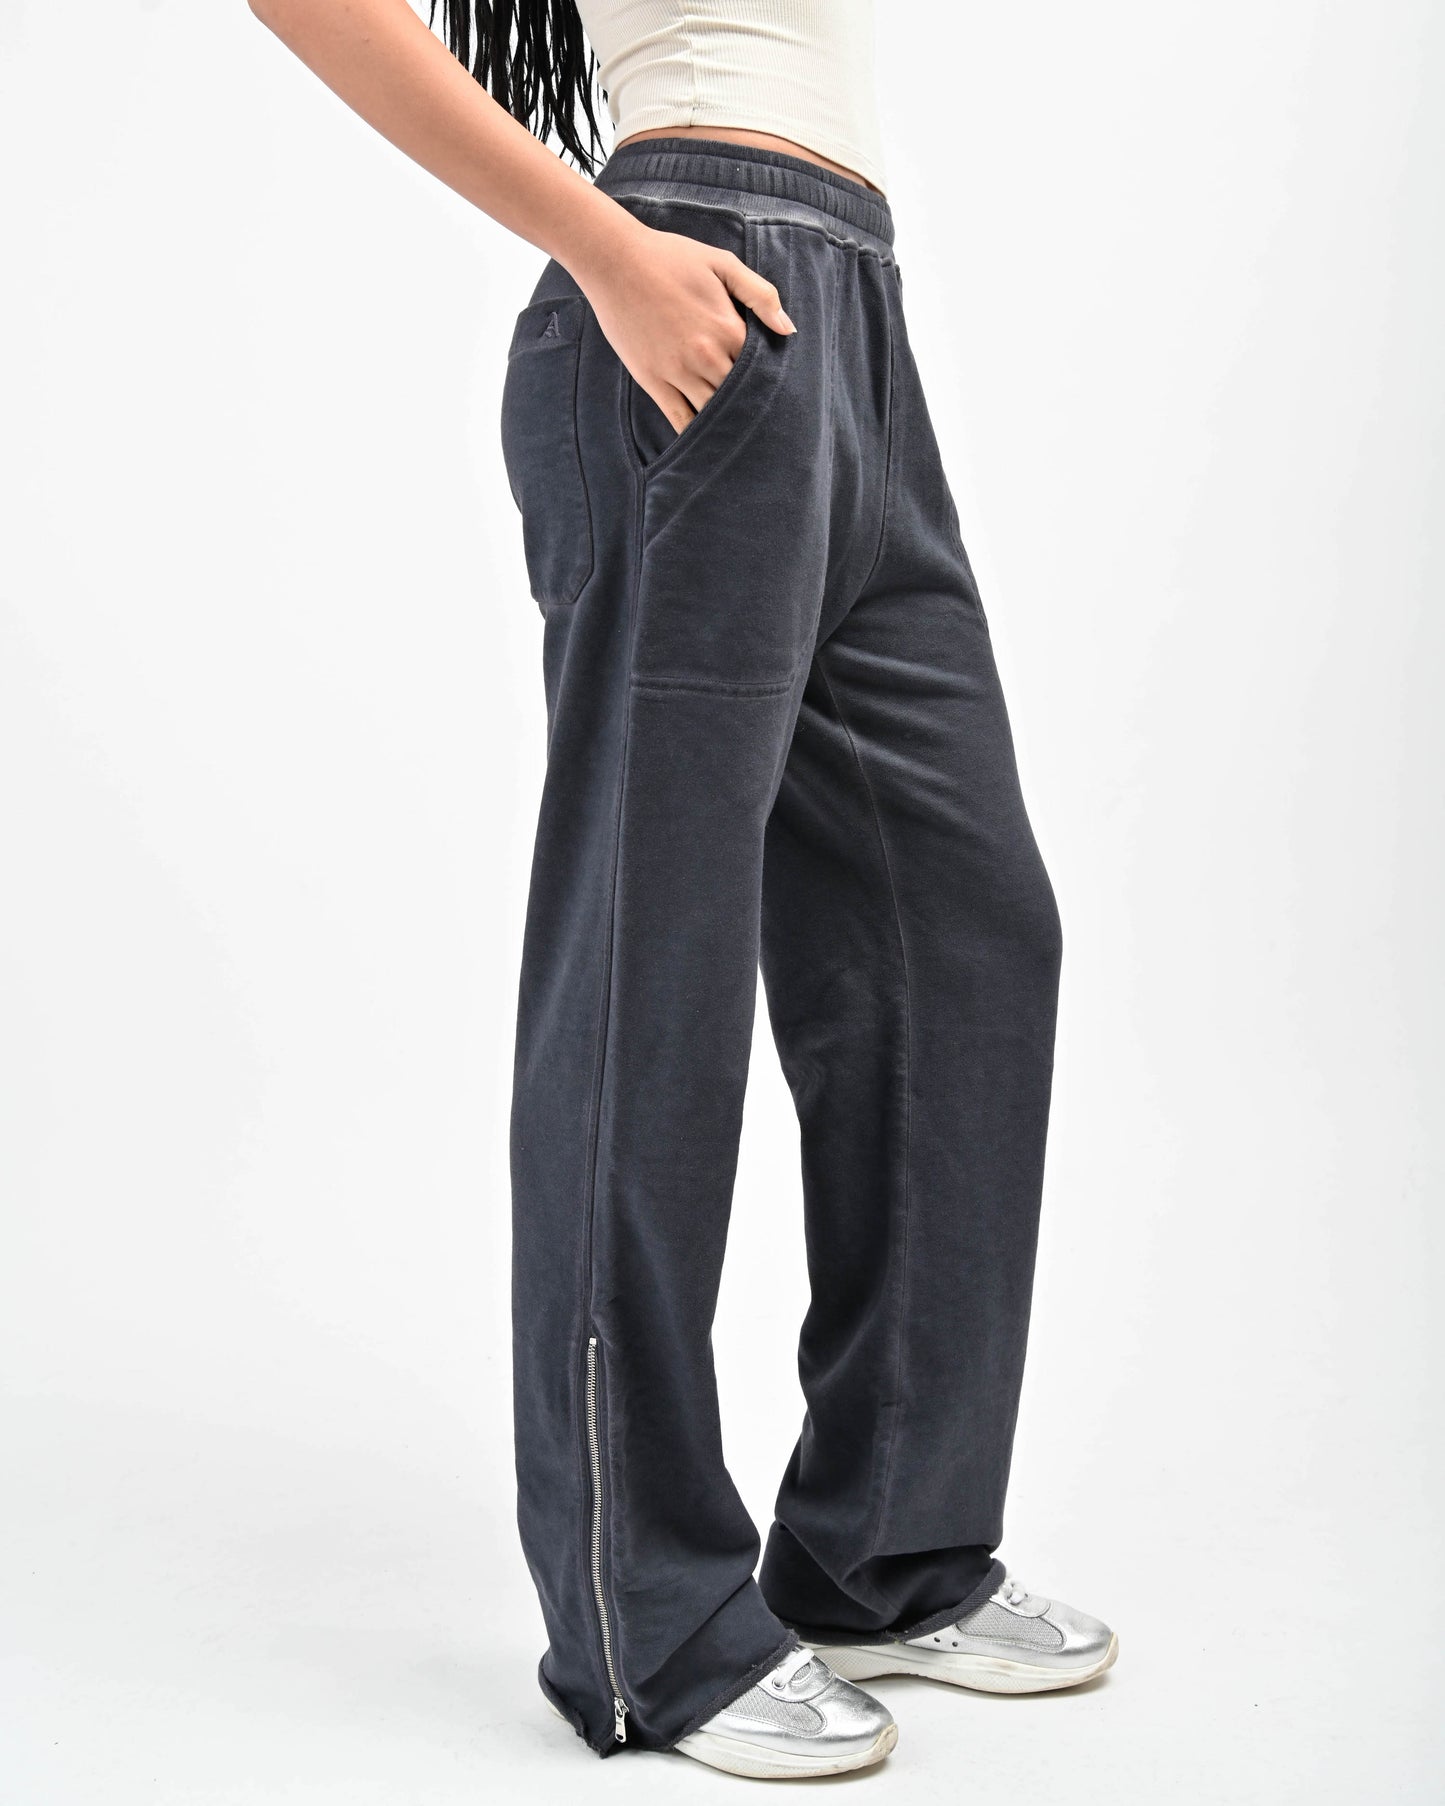 Side View of Allora Track Pants in color Indigo Blue